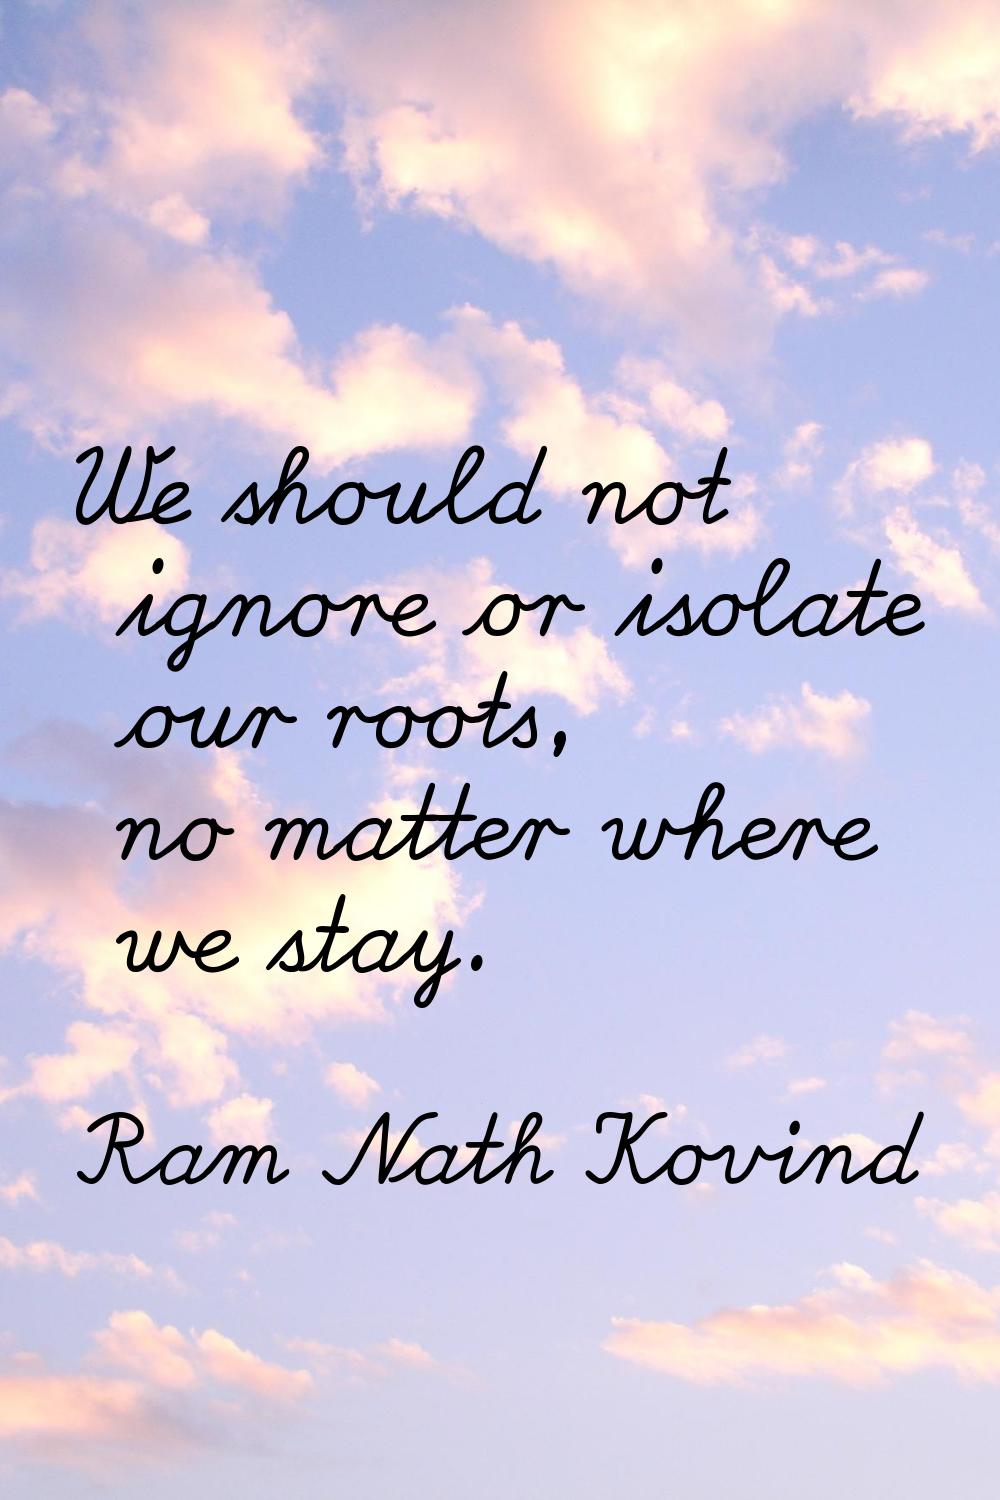 We should not ignore or isolate our roots, no matter where we stay.